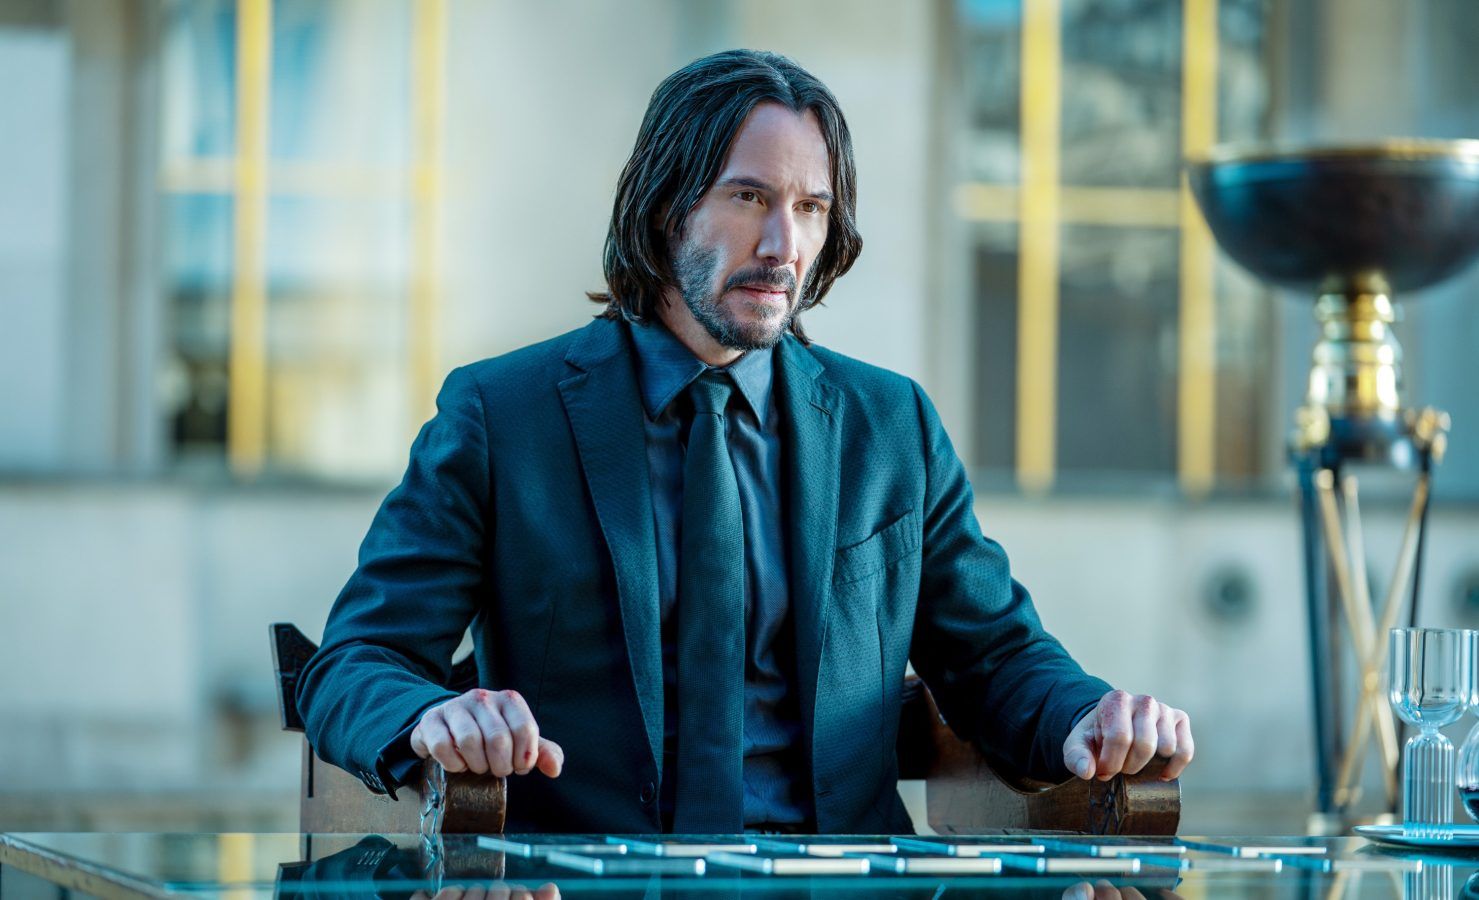 John Wick 4 Takes Over Indian Box office: Check Out IMDb Rating